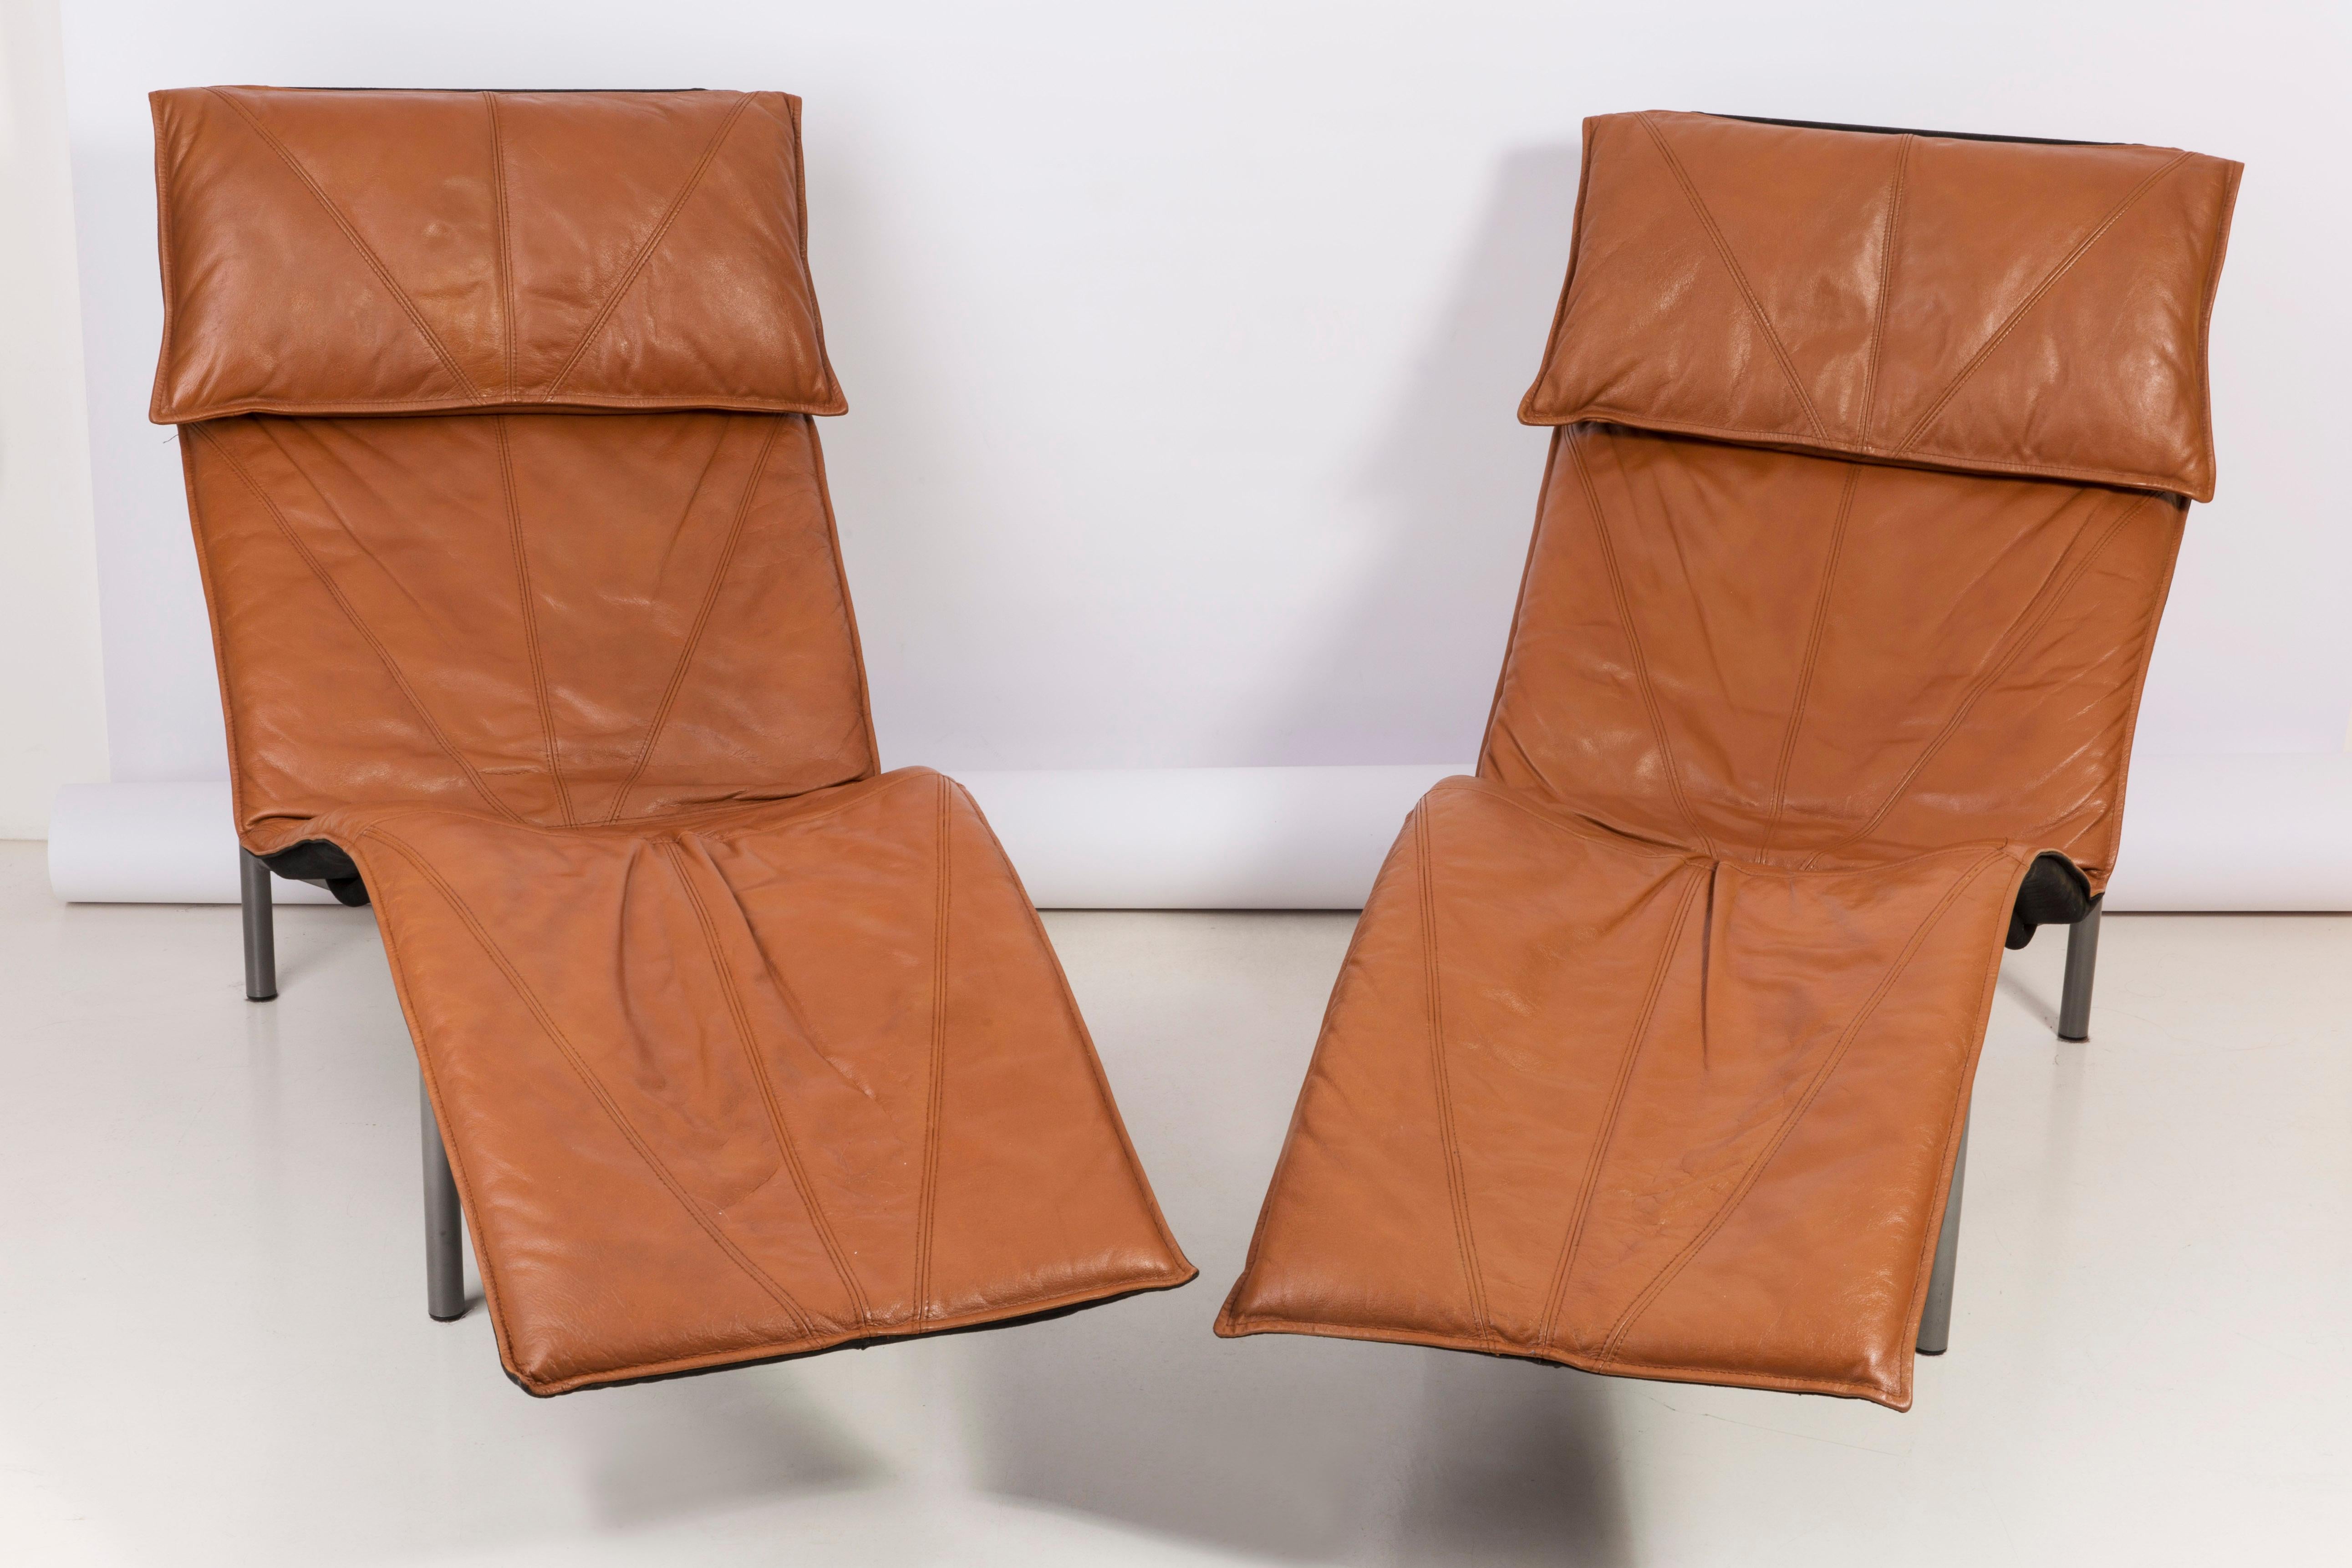 Steel Midcentury Danish Modern Brown Leather Chaise Lounge Chair by Tord Björklund For Sale